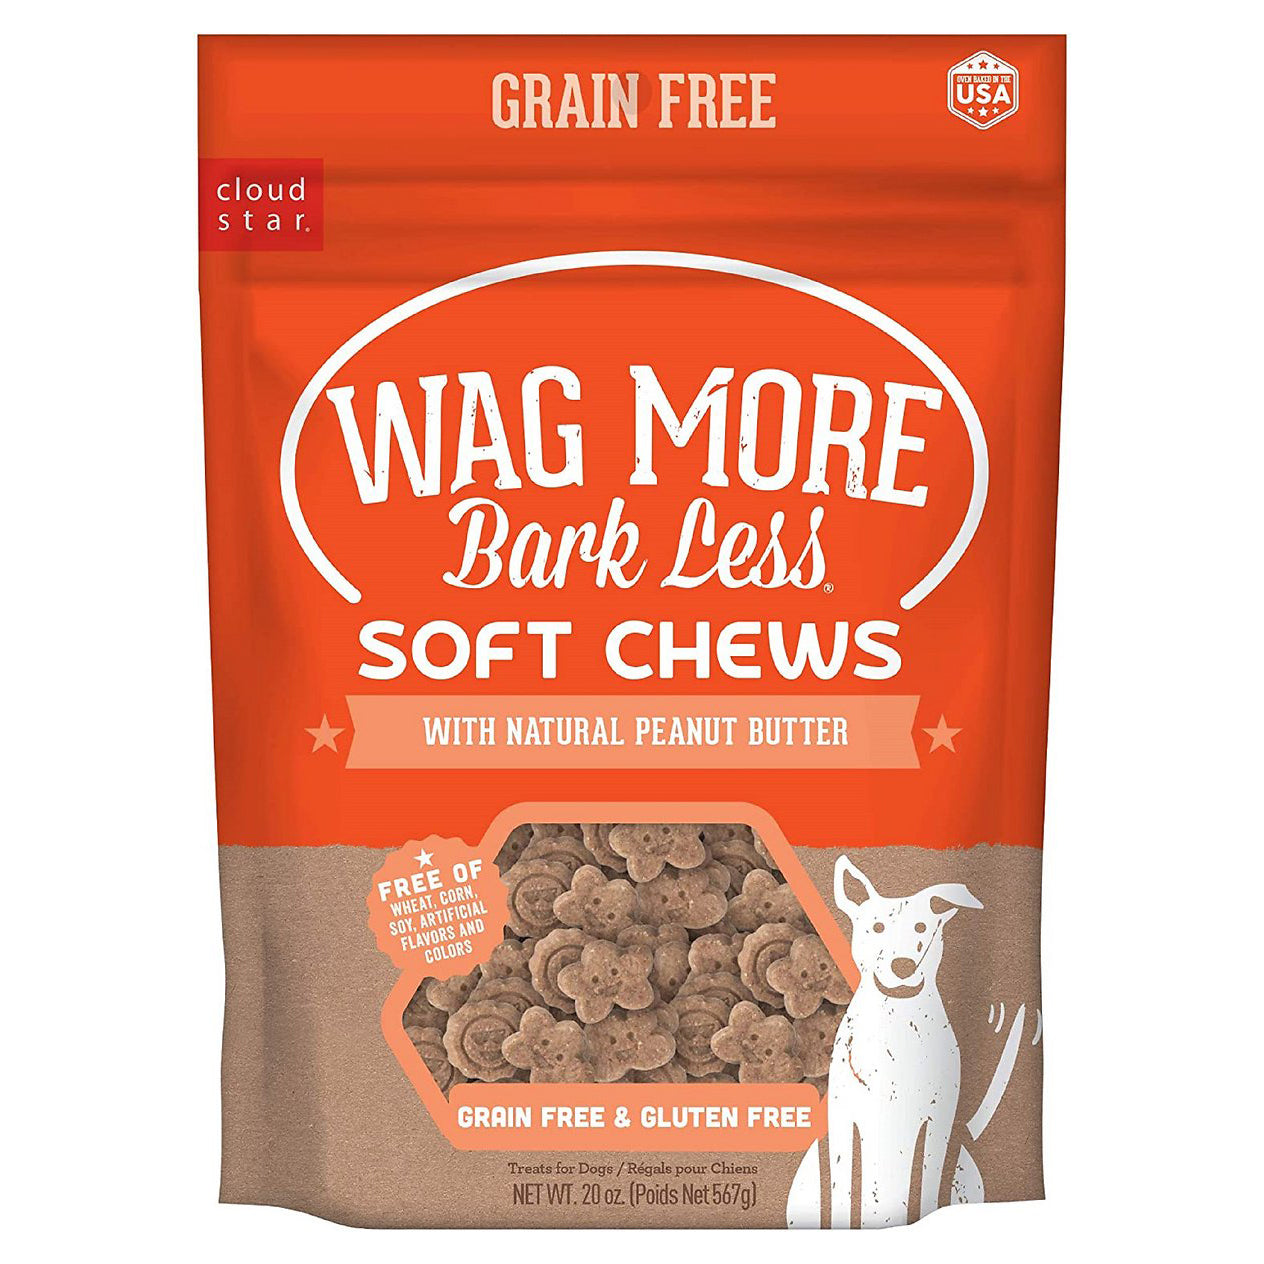 Cloud Star Wag More Bark Less Soft & Chewy Peanut Butter 20 OZ